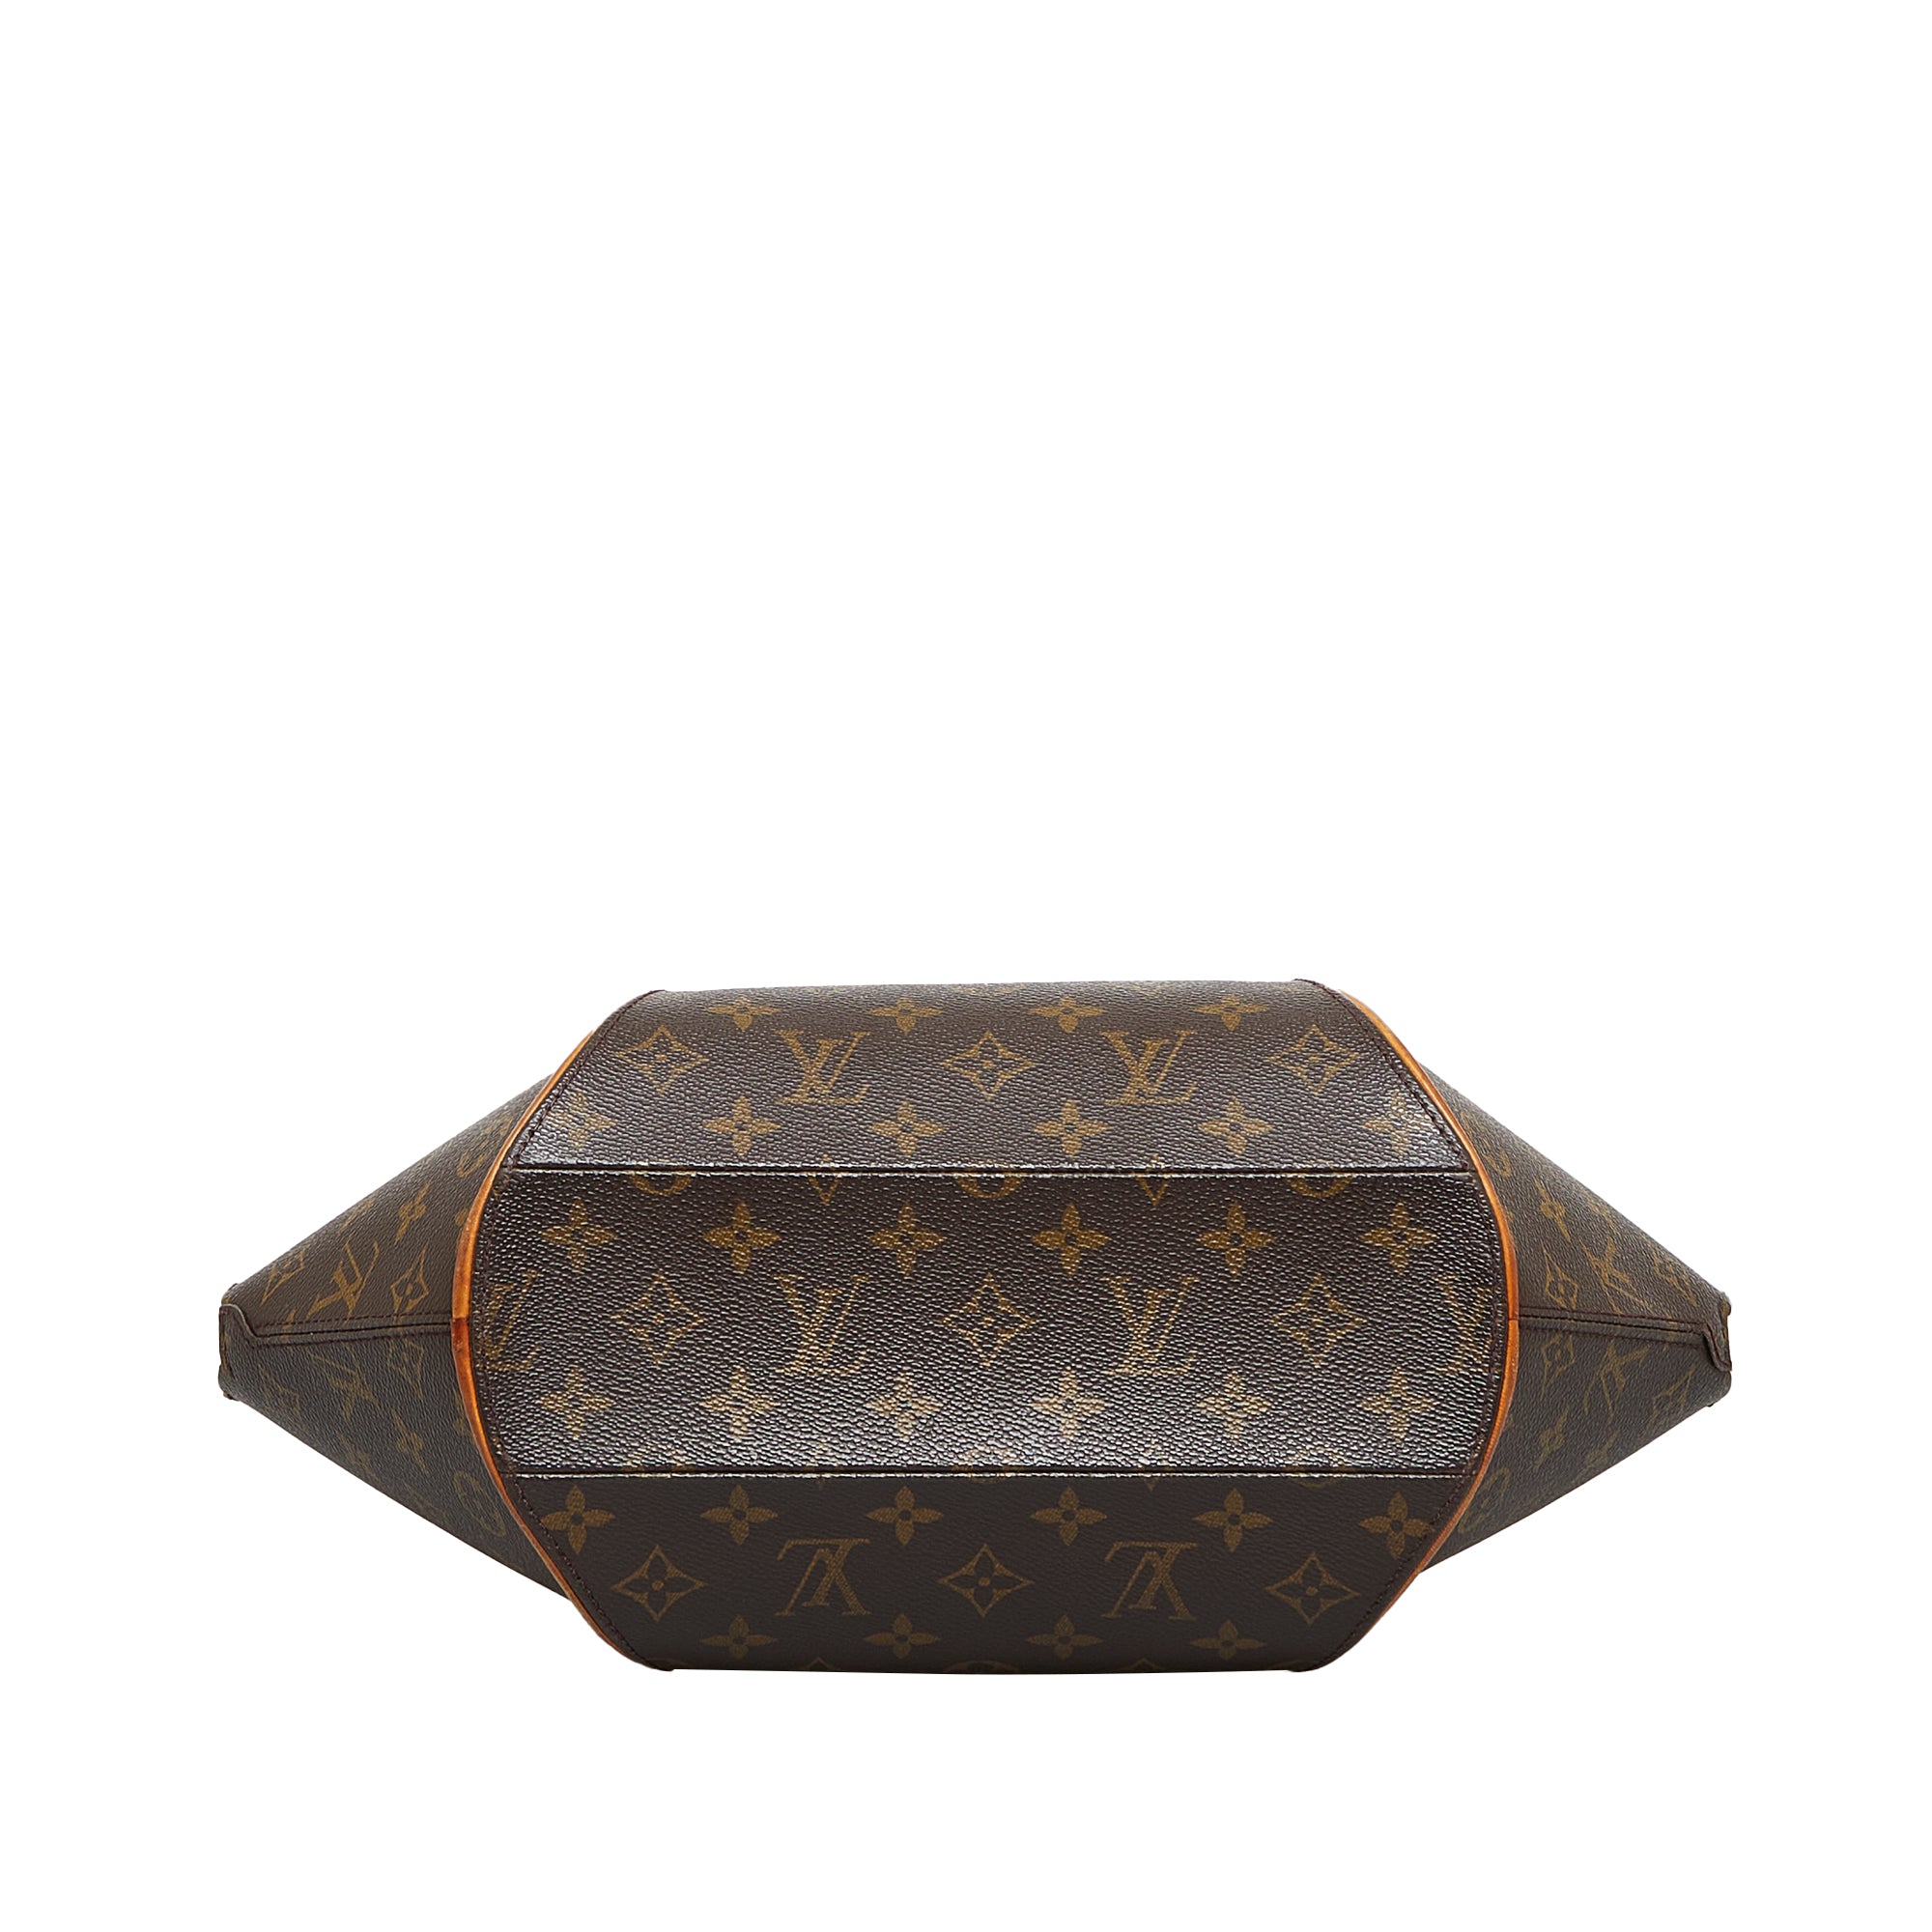 A Guide to Authenticating the Louis Vuitton Ellipse Shopping, MM